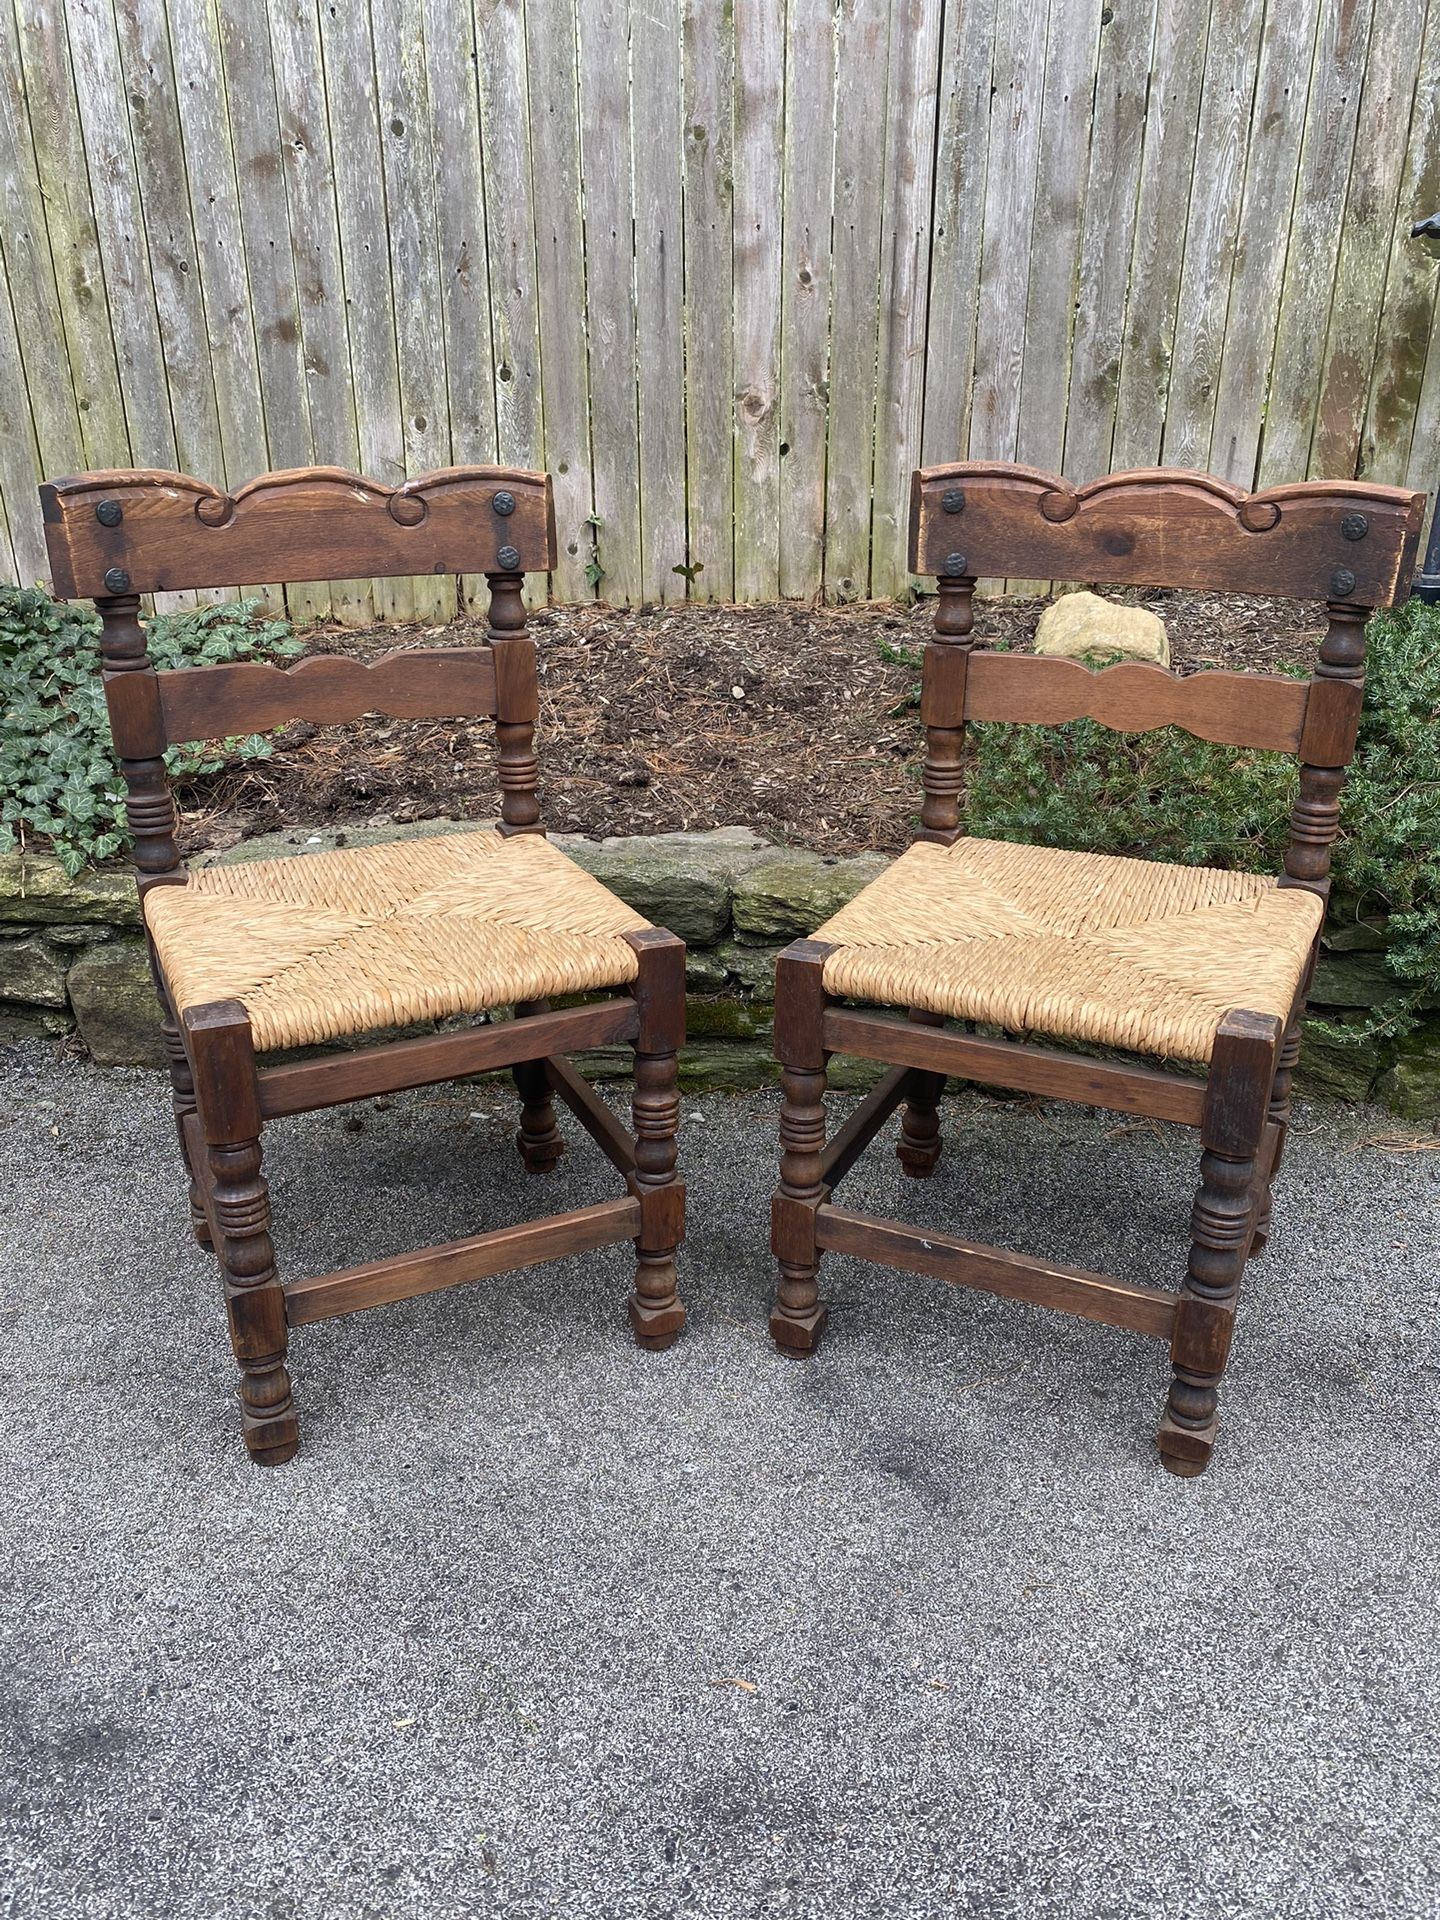 Vintage 1970s Wooden Woven Chairs